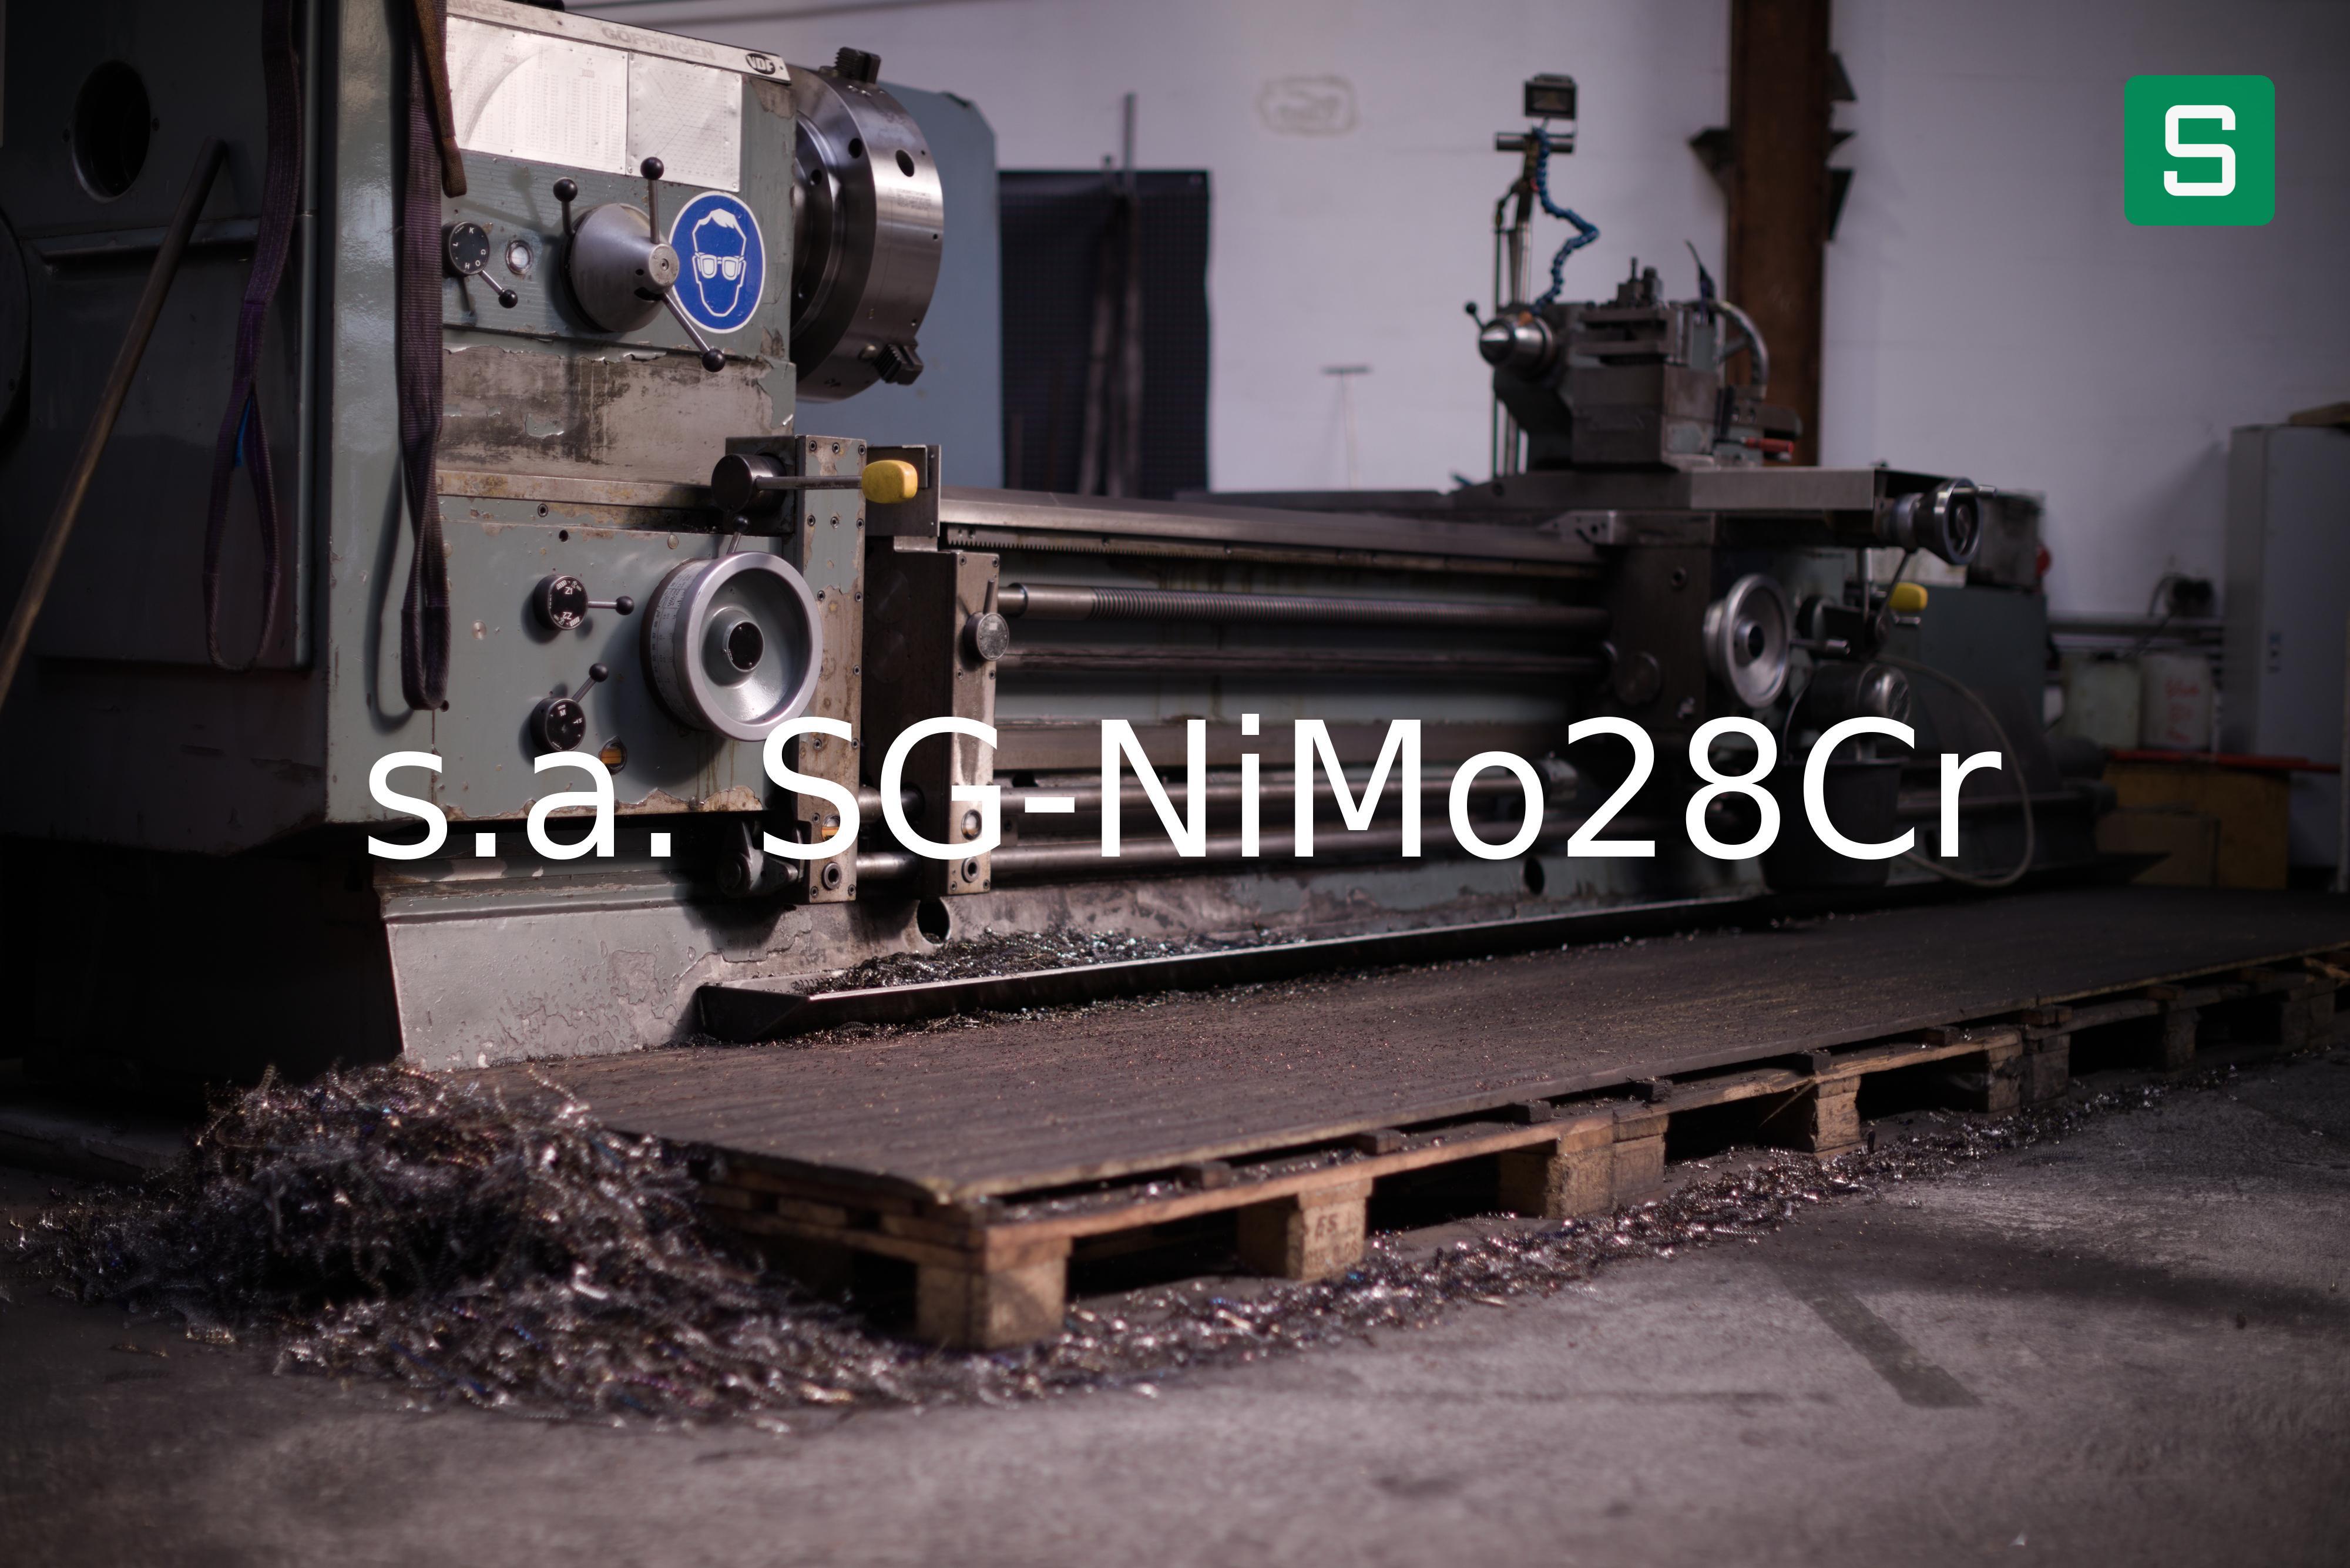 Steel Material: s.a. SG-NiMo28Cr